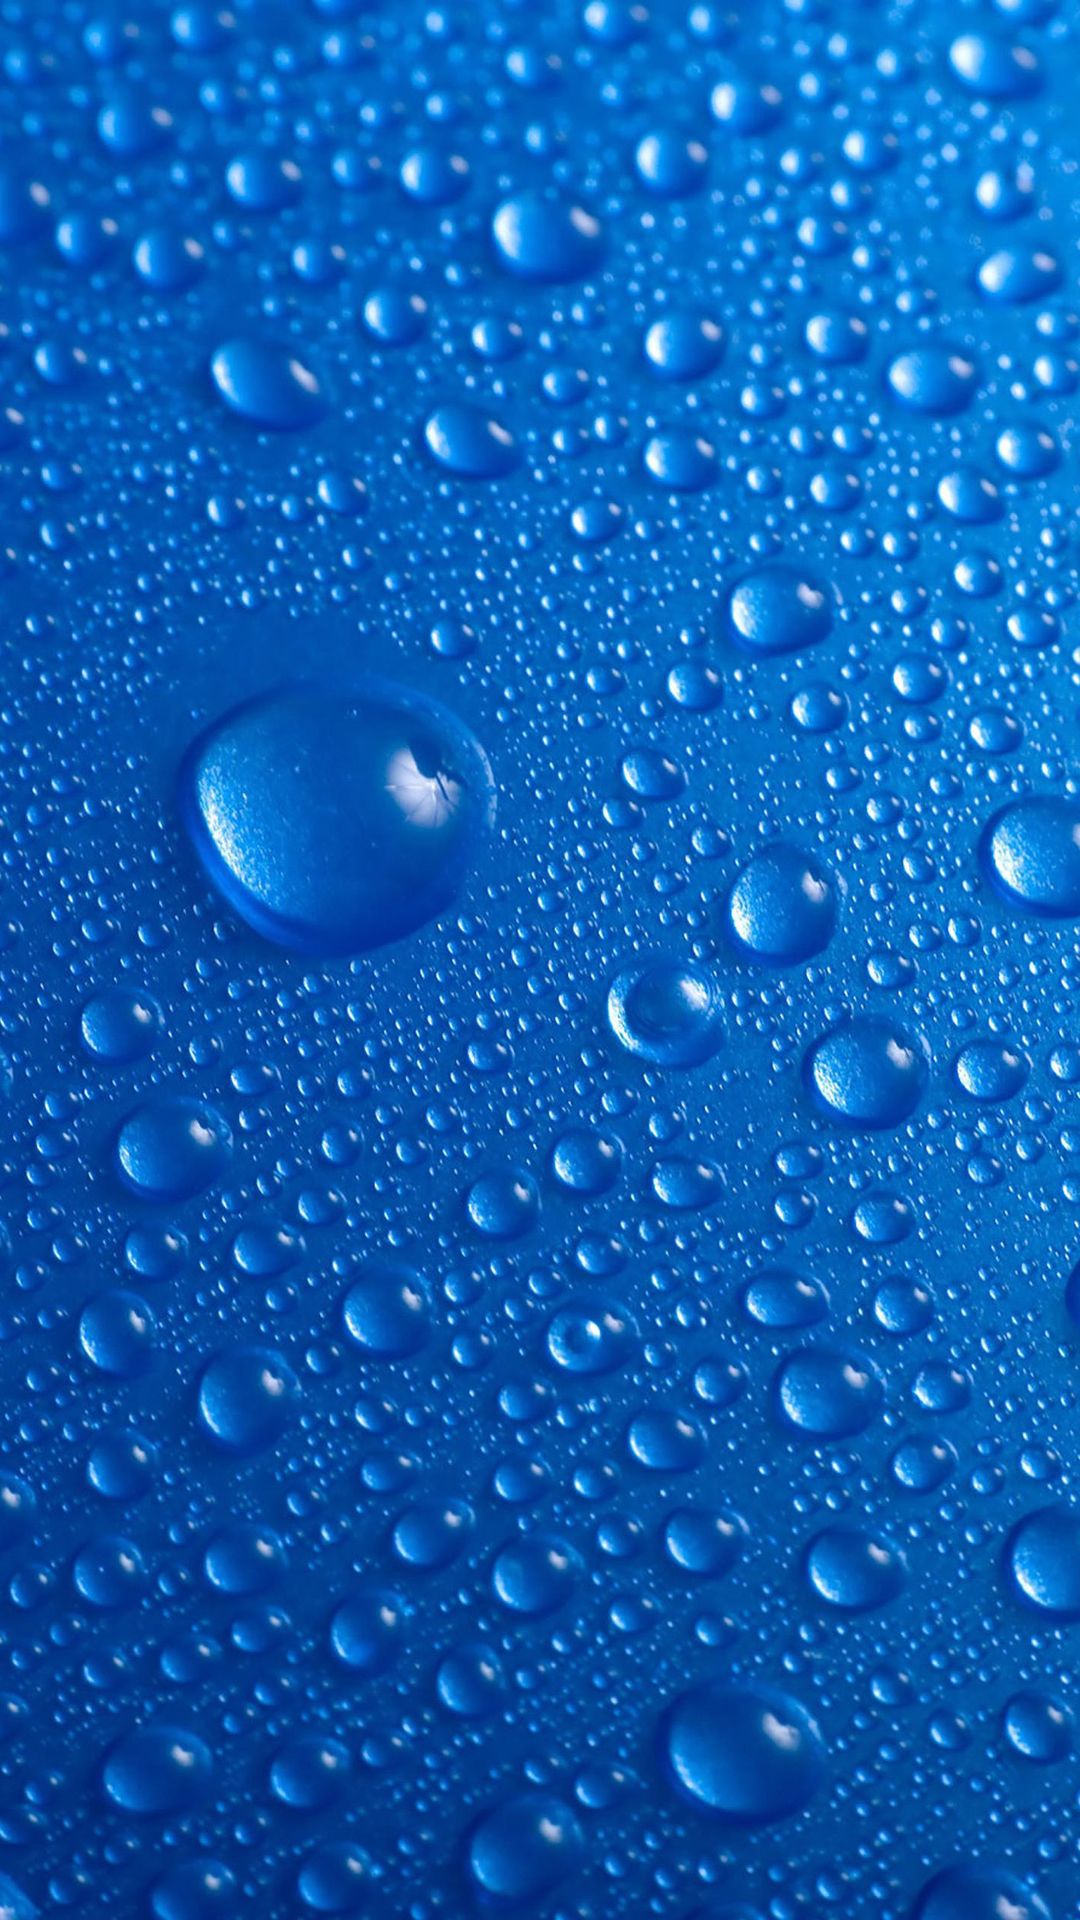 Background Drops Of Water